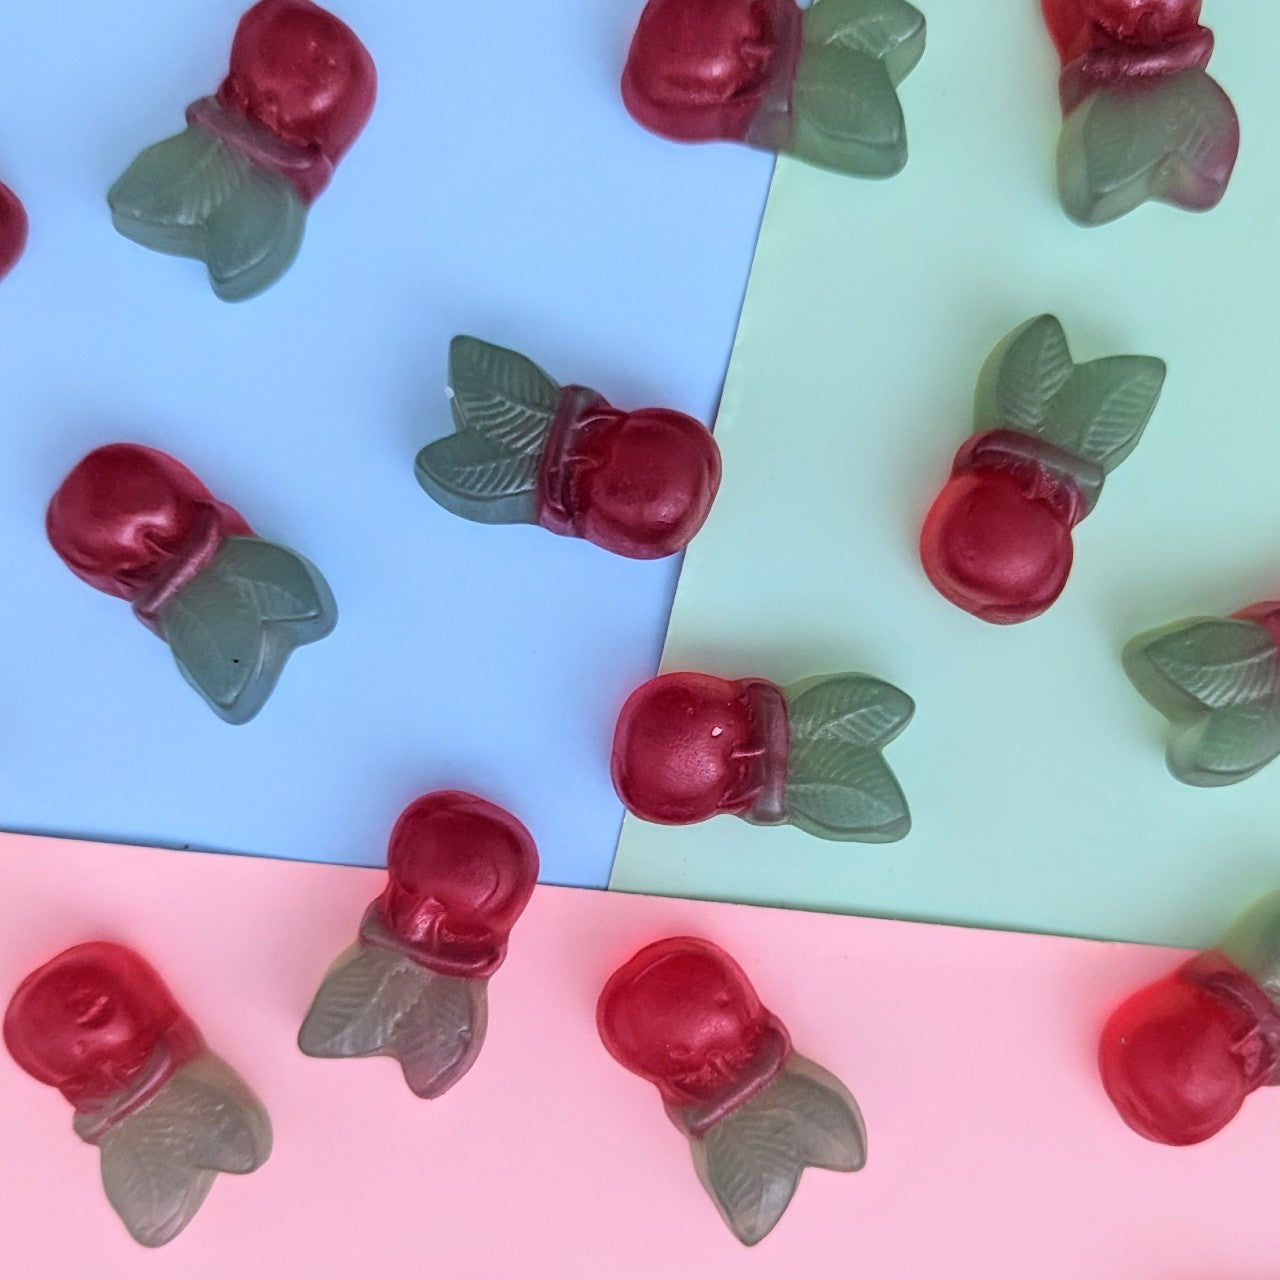 Jelly cherry sweets